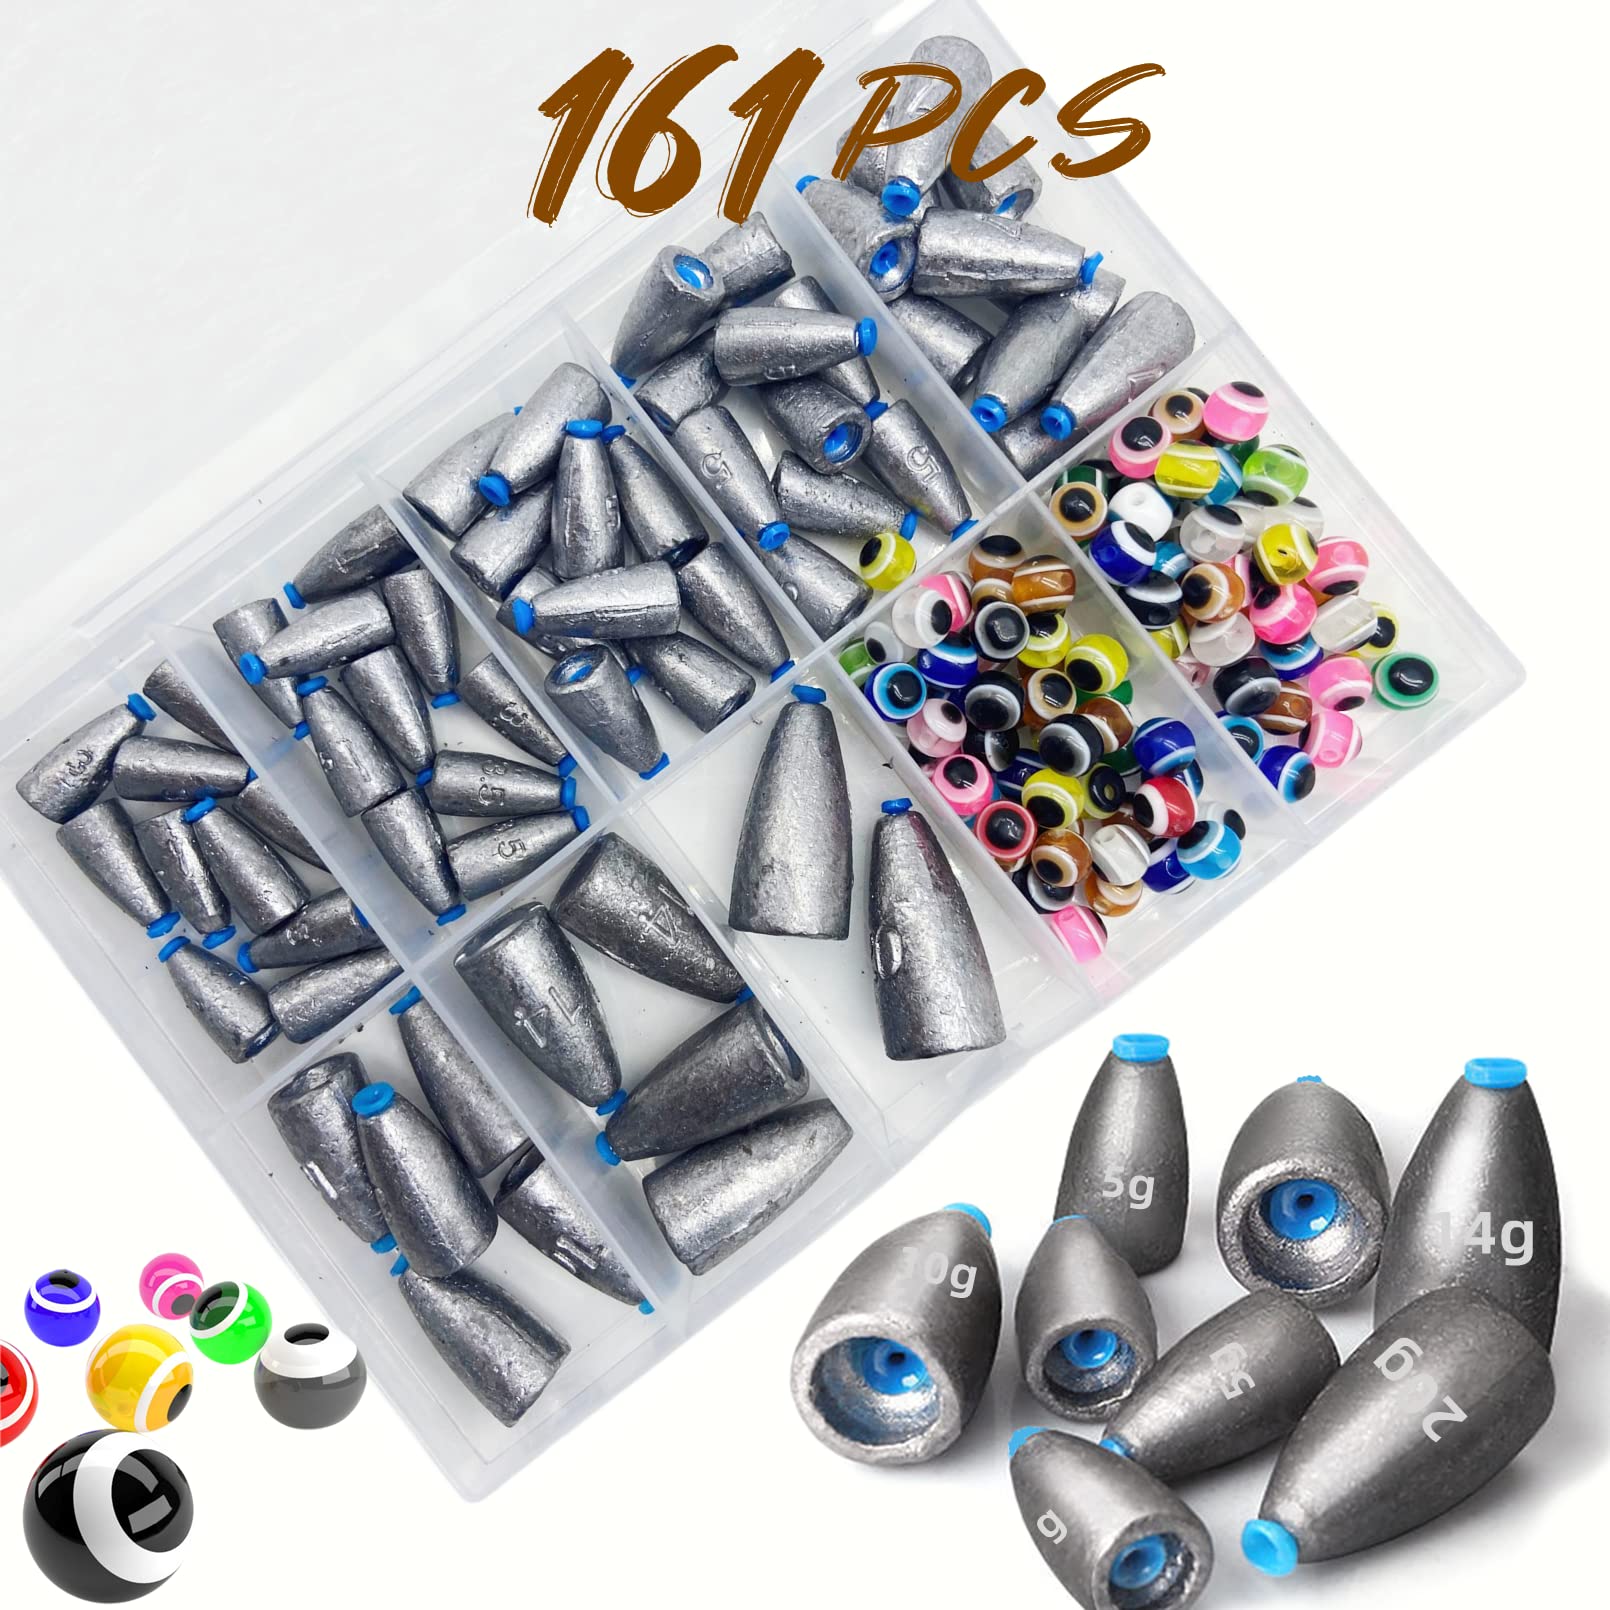 Weights & Sinkers, Fishing Weights - Fishing Sinkers - Fishing Weights  Sinkers - Tungsten Fishing Weights - Tungsten Sinkers